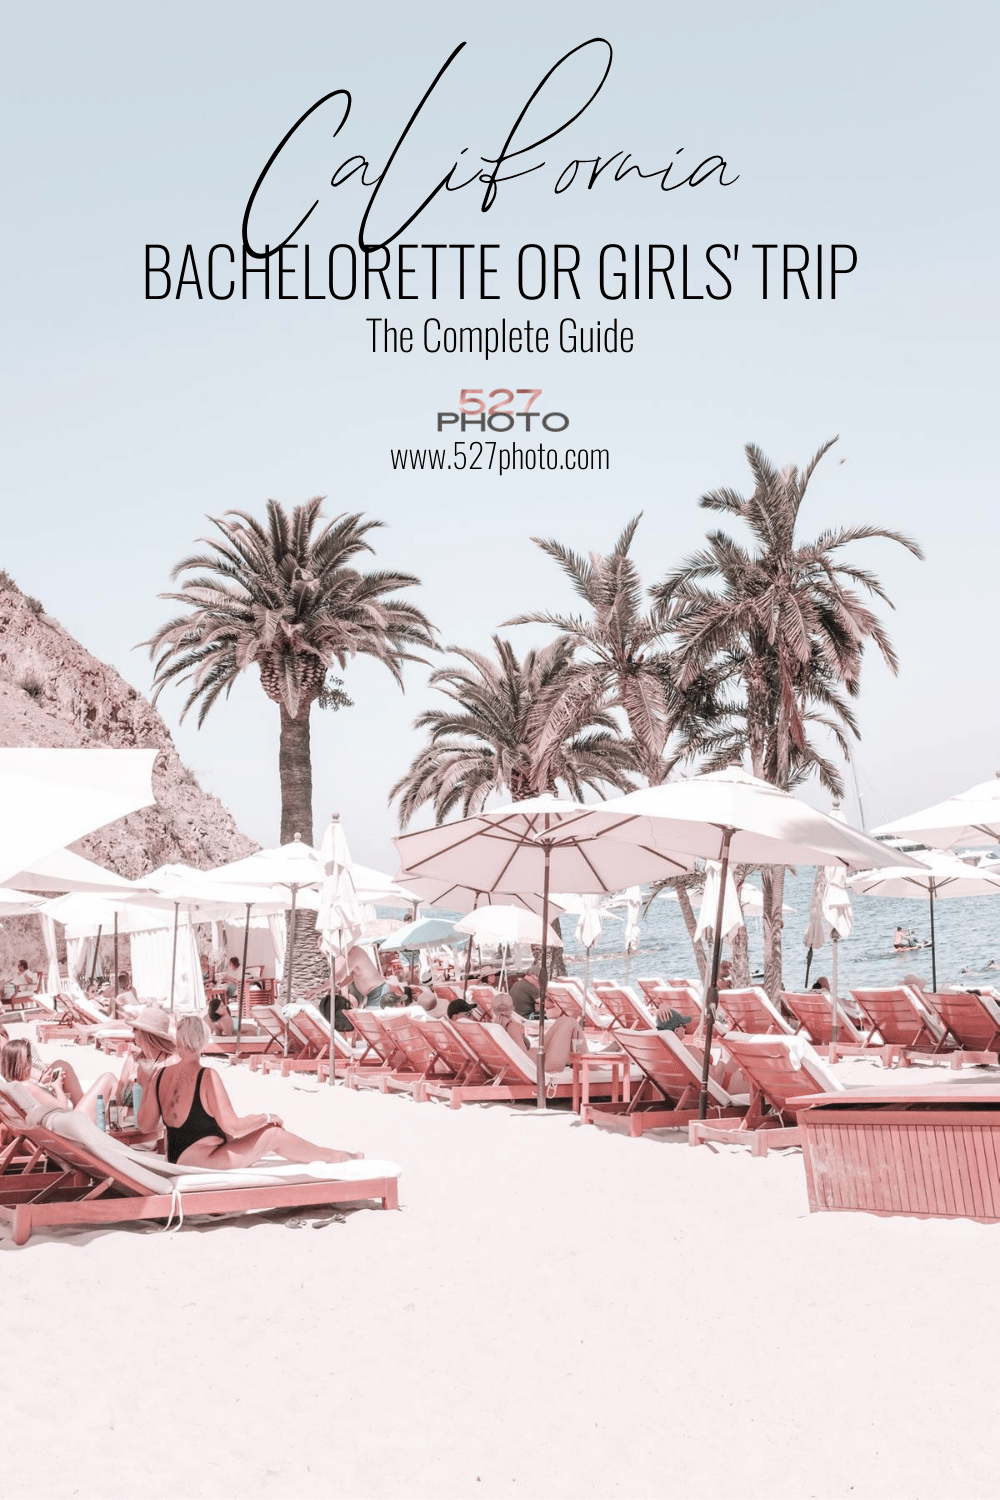 Best bachelorette party and girls trip destinations